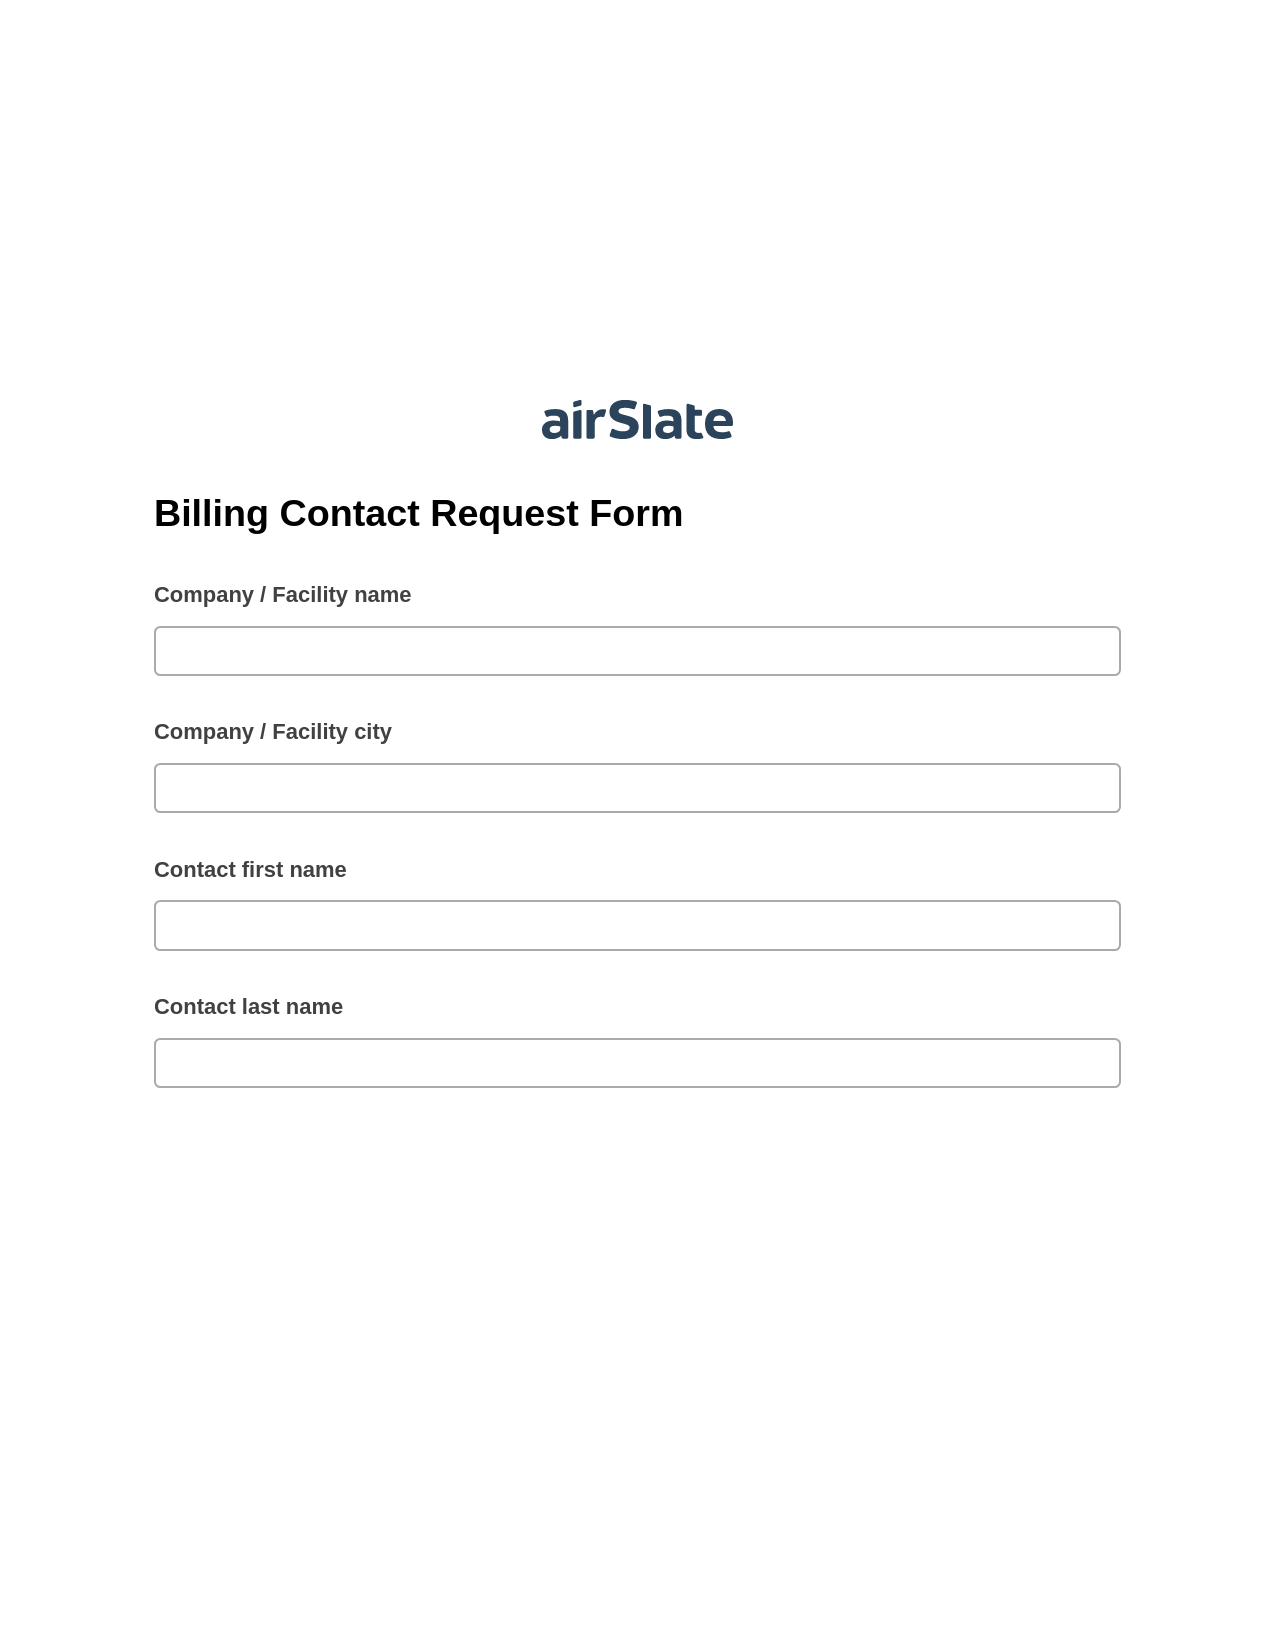 Multirole Billing Contact Request Form Pre-fill from another Slate Bot, Create MS Dynamics 365 Records Bot, Post-finish Document Bot